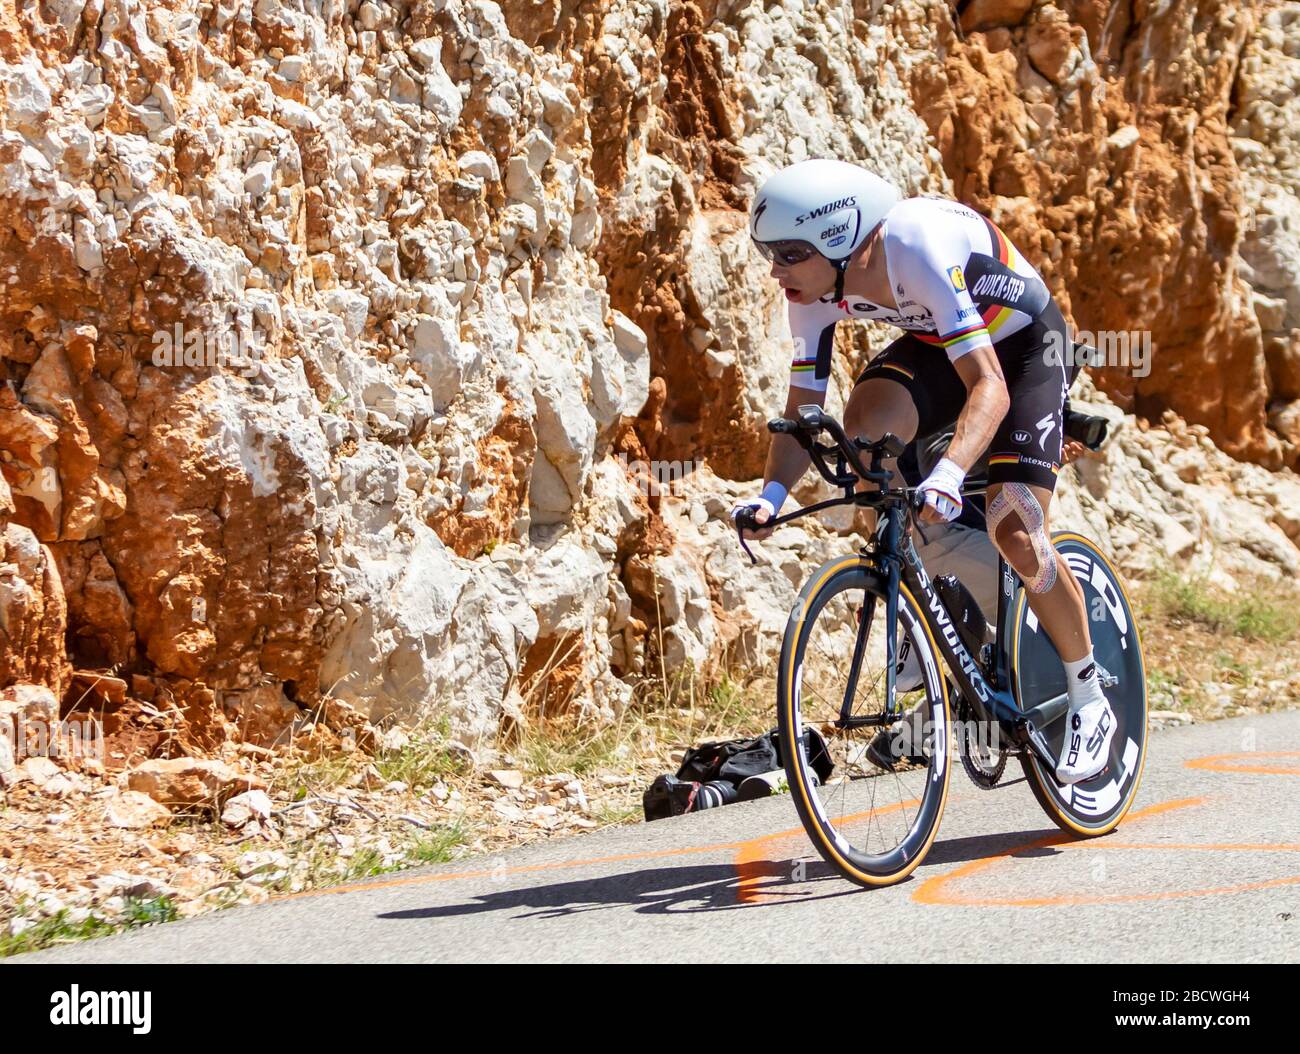 Col du Serre de Tourre,France - July 15,2016: The German cyclist Tony Martin of Trek-Segafredo Team riding during an individual time trial stage in Ar Stock Photo